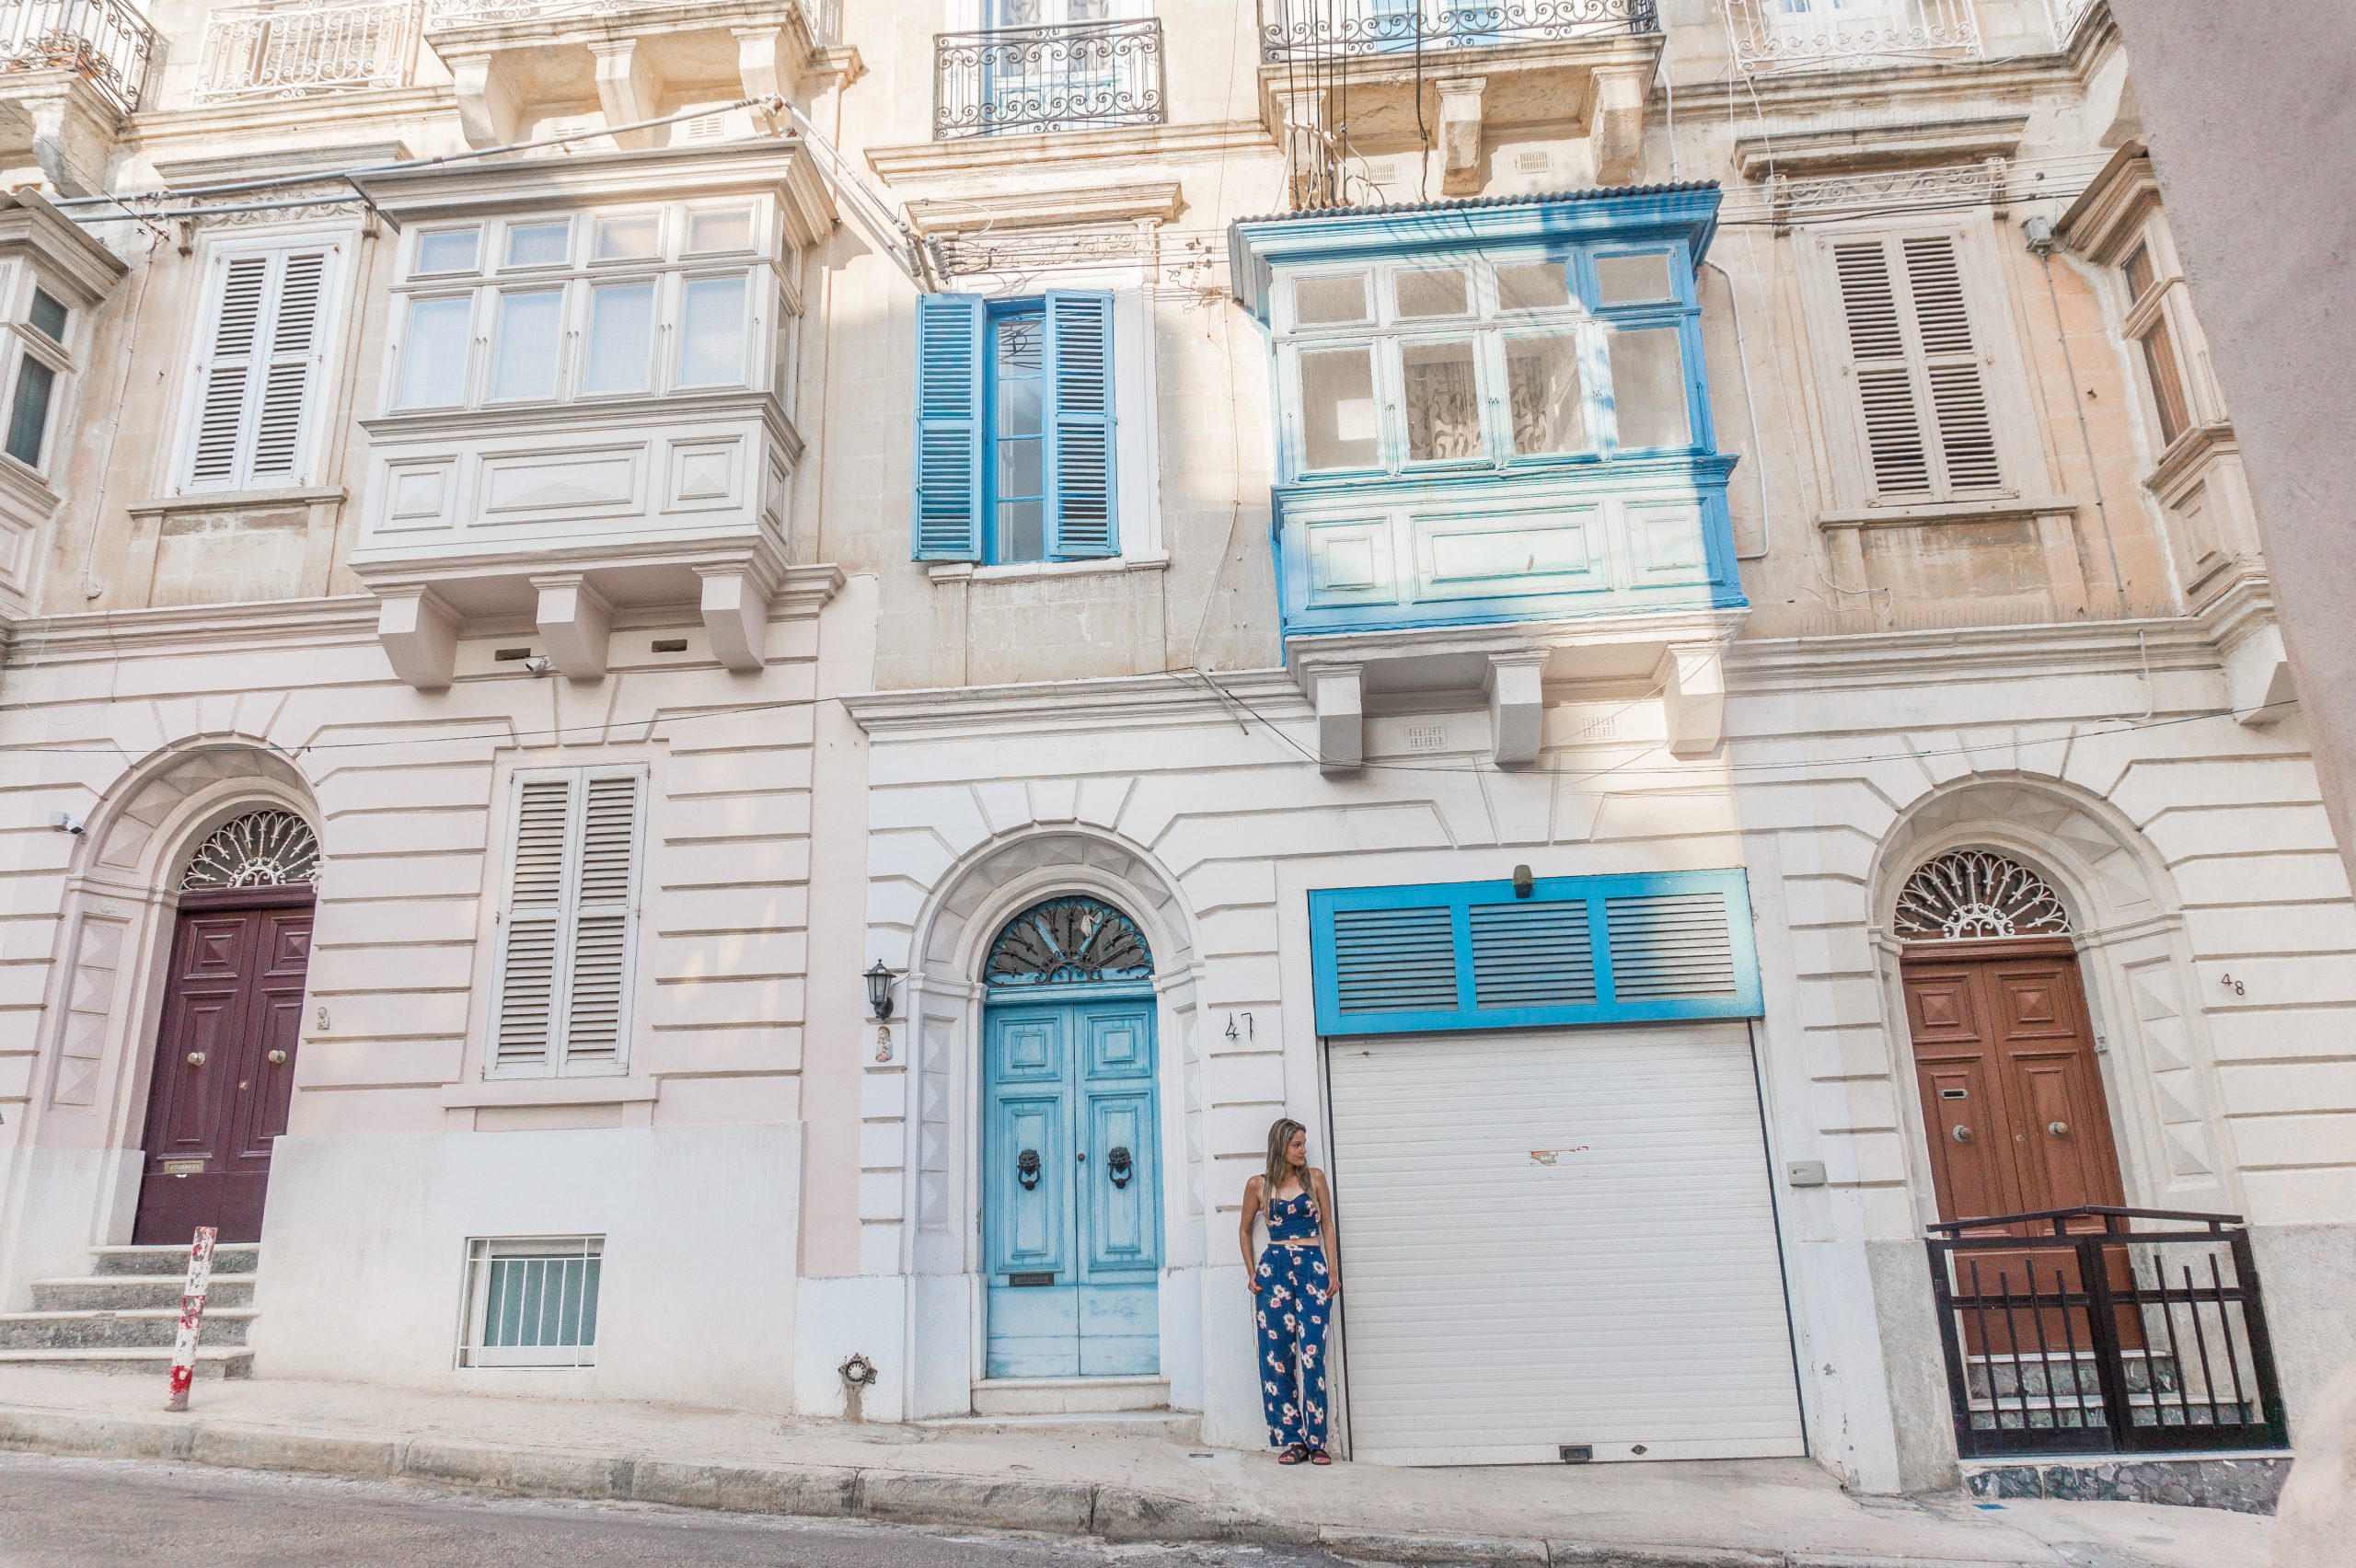 Where to stay in Malta + How to get around